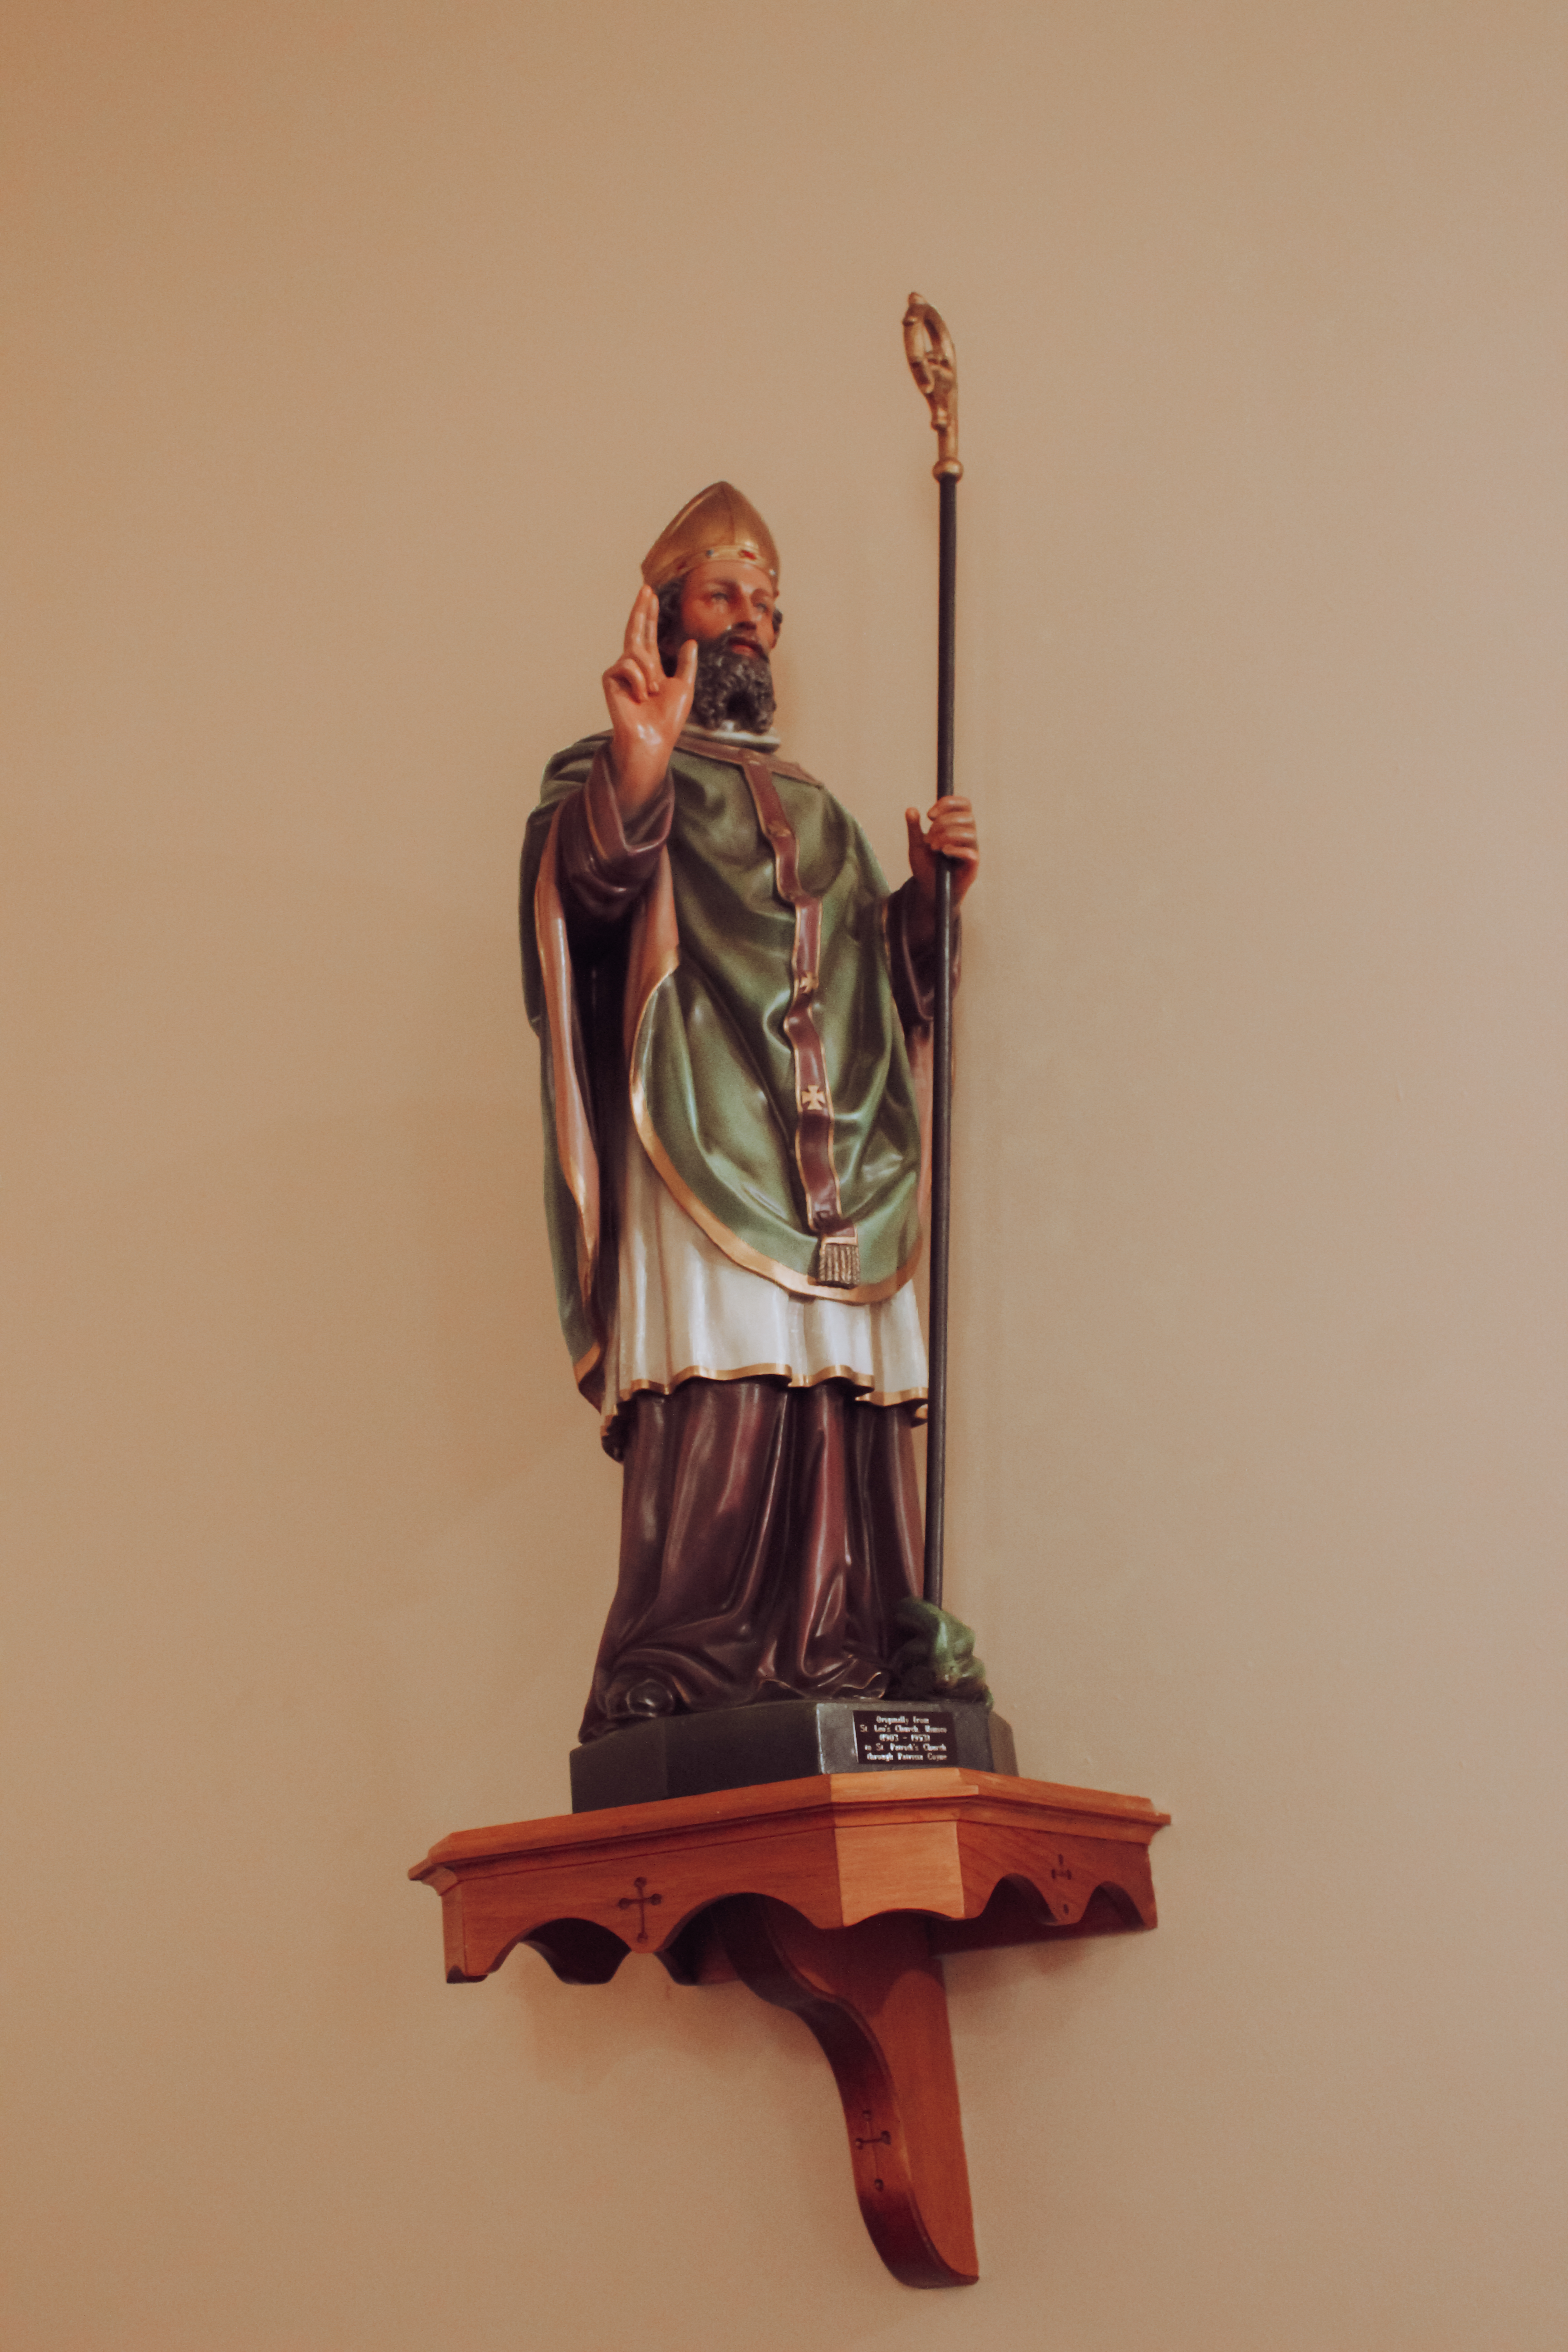 The statue of St. Patrick at St. Patrick's Church